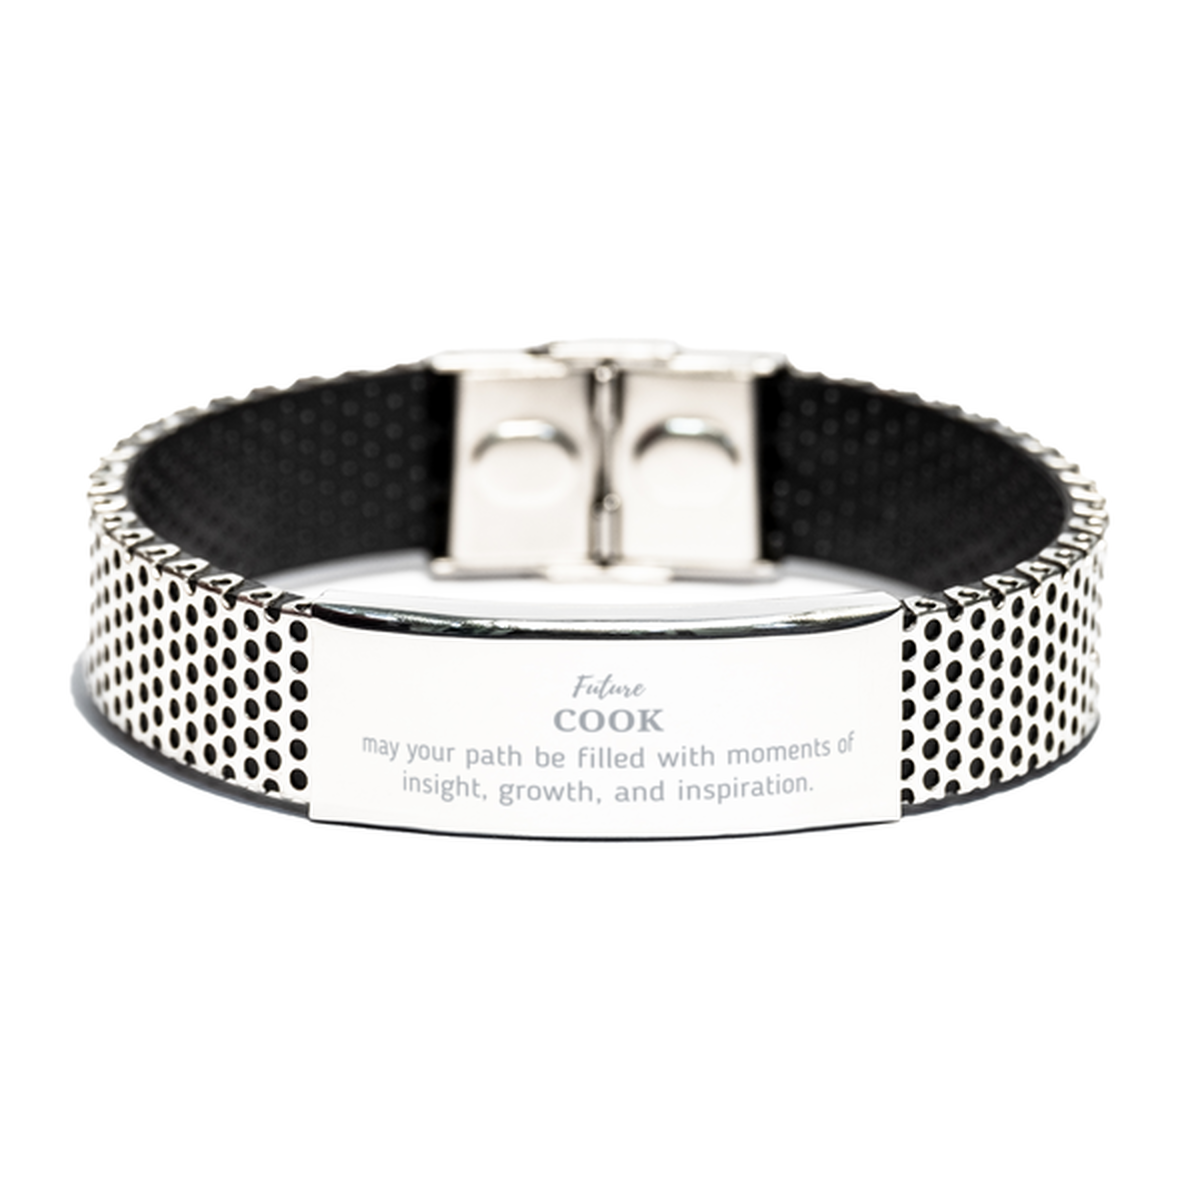 Future Cook Gifts, May your path be filled with moments of insight, Graduation Gifts for New Cook, Christmas Unique Stainless Steel Bracelet For Men, Women, Friends